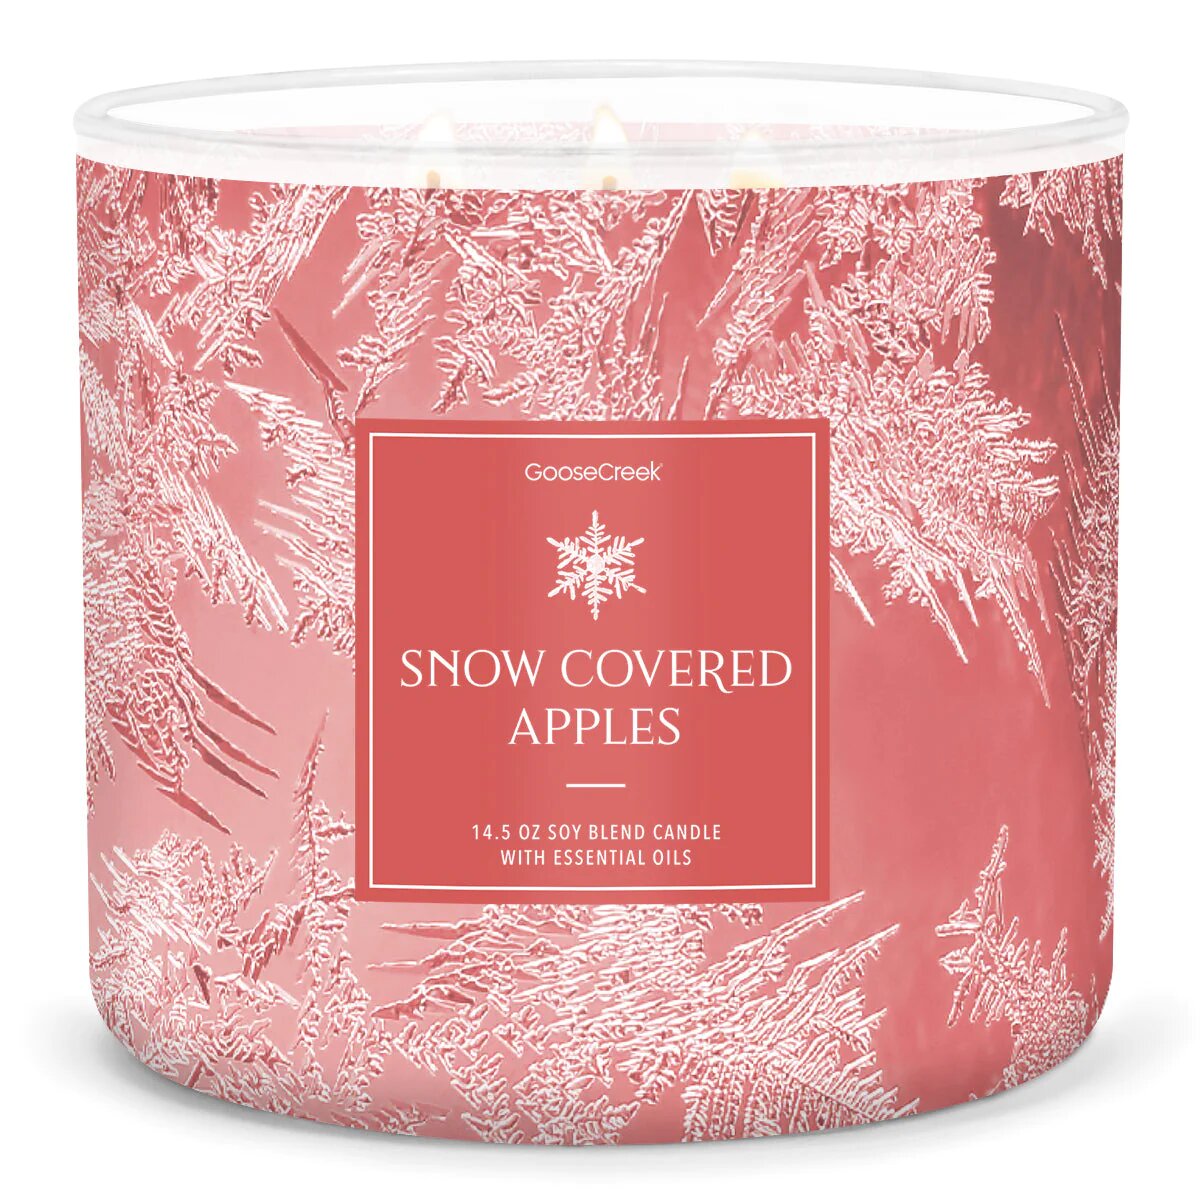 Snow Covered Apples 411g (3-Docht)